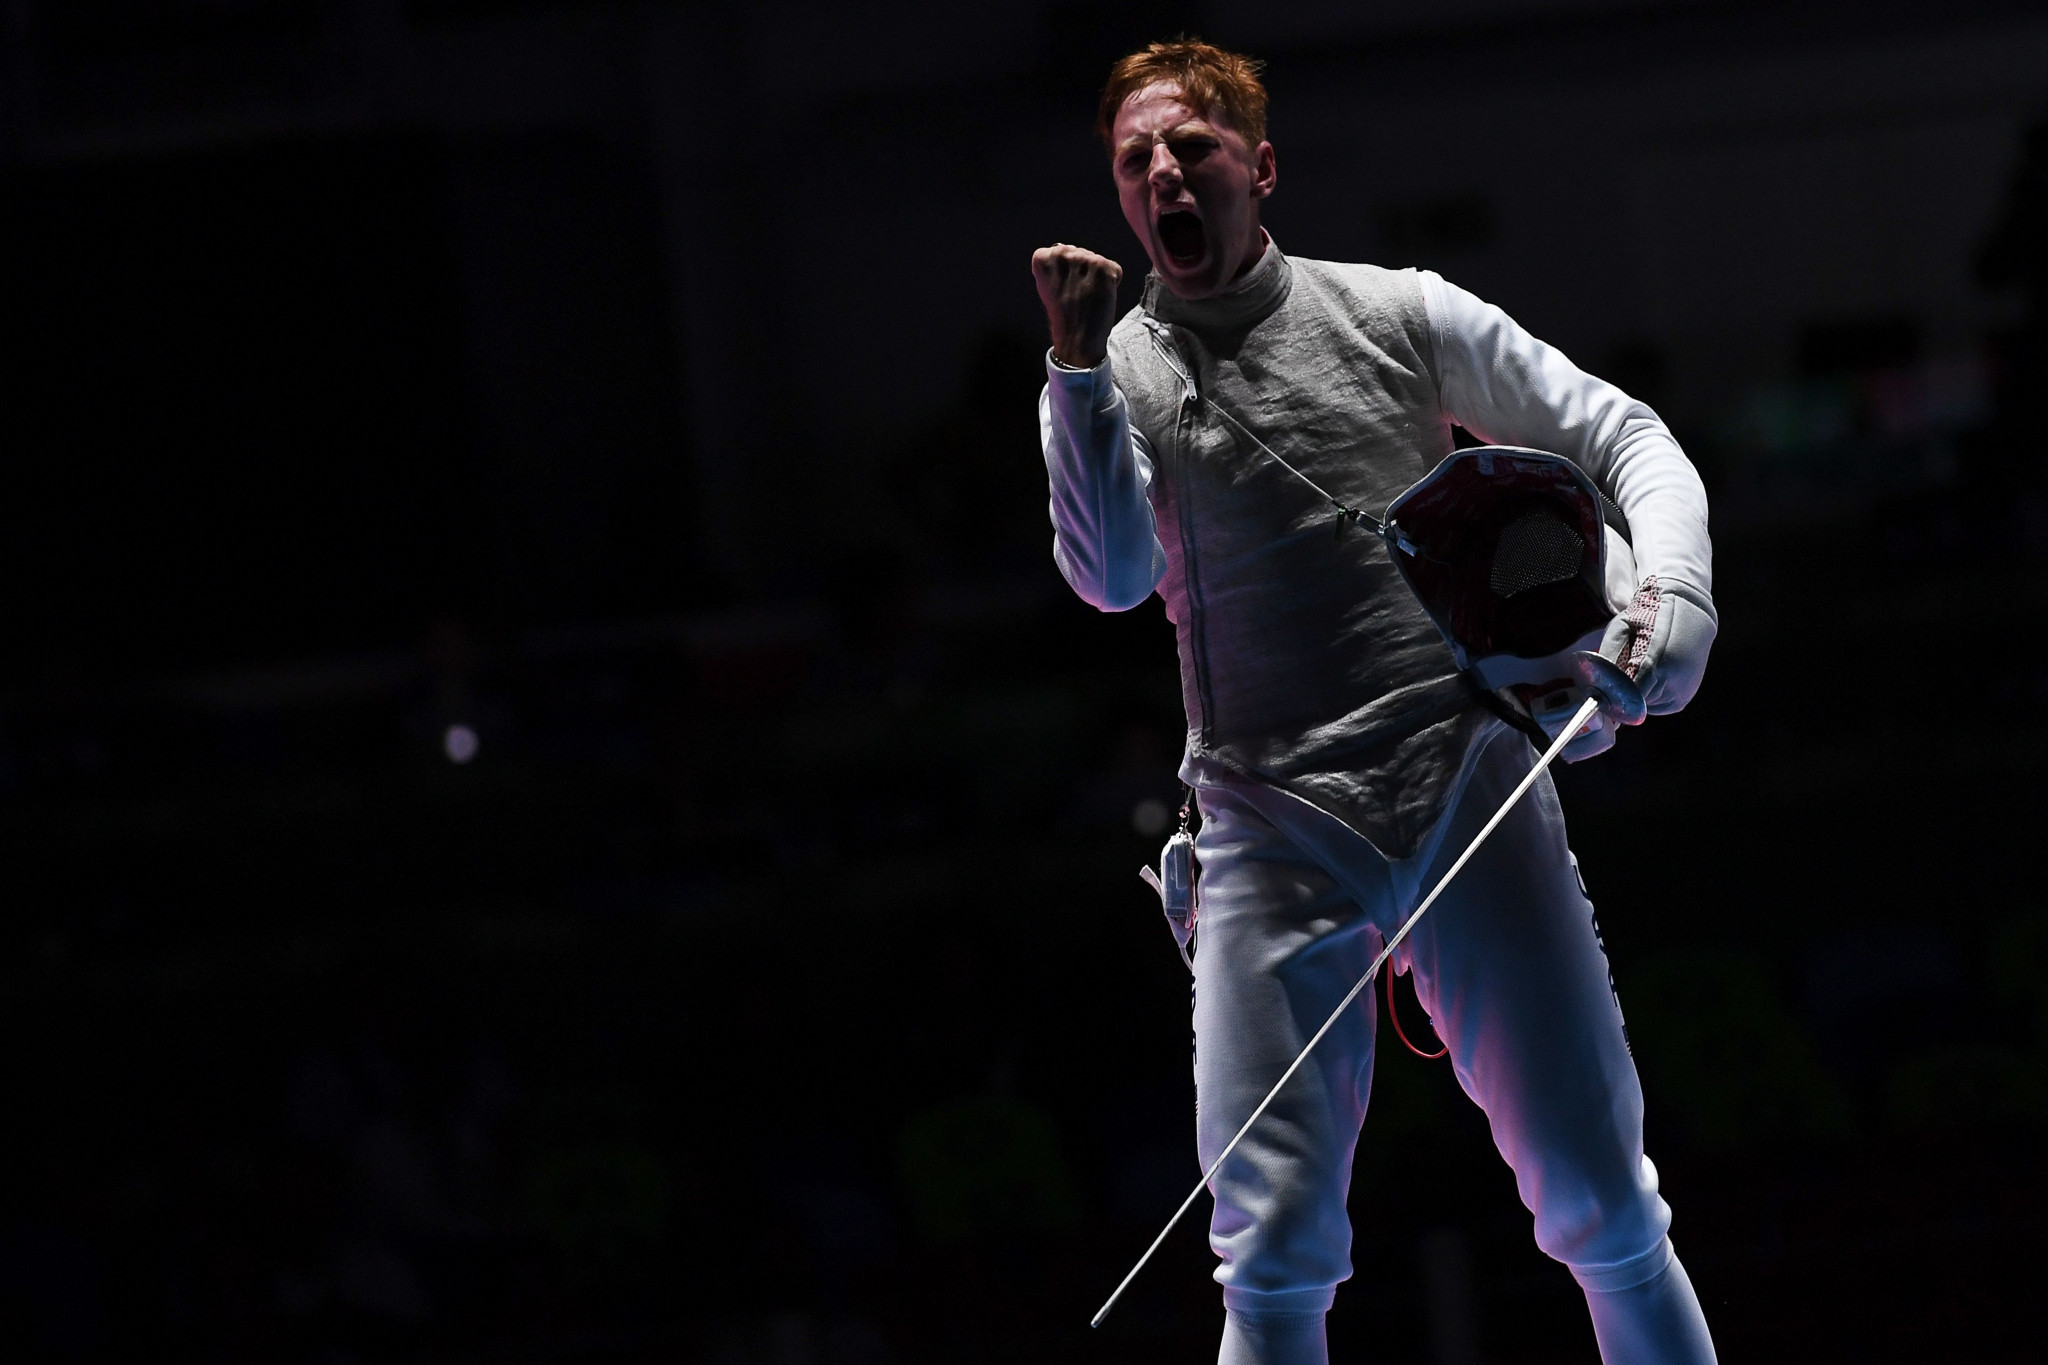 Race Imboden secured victory in the men's foil competition ©Getty Images